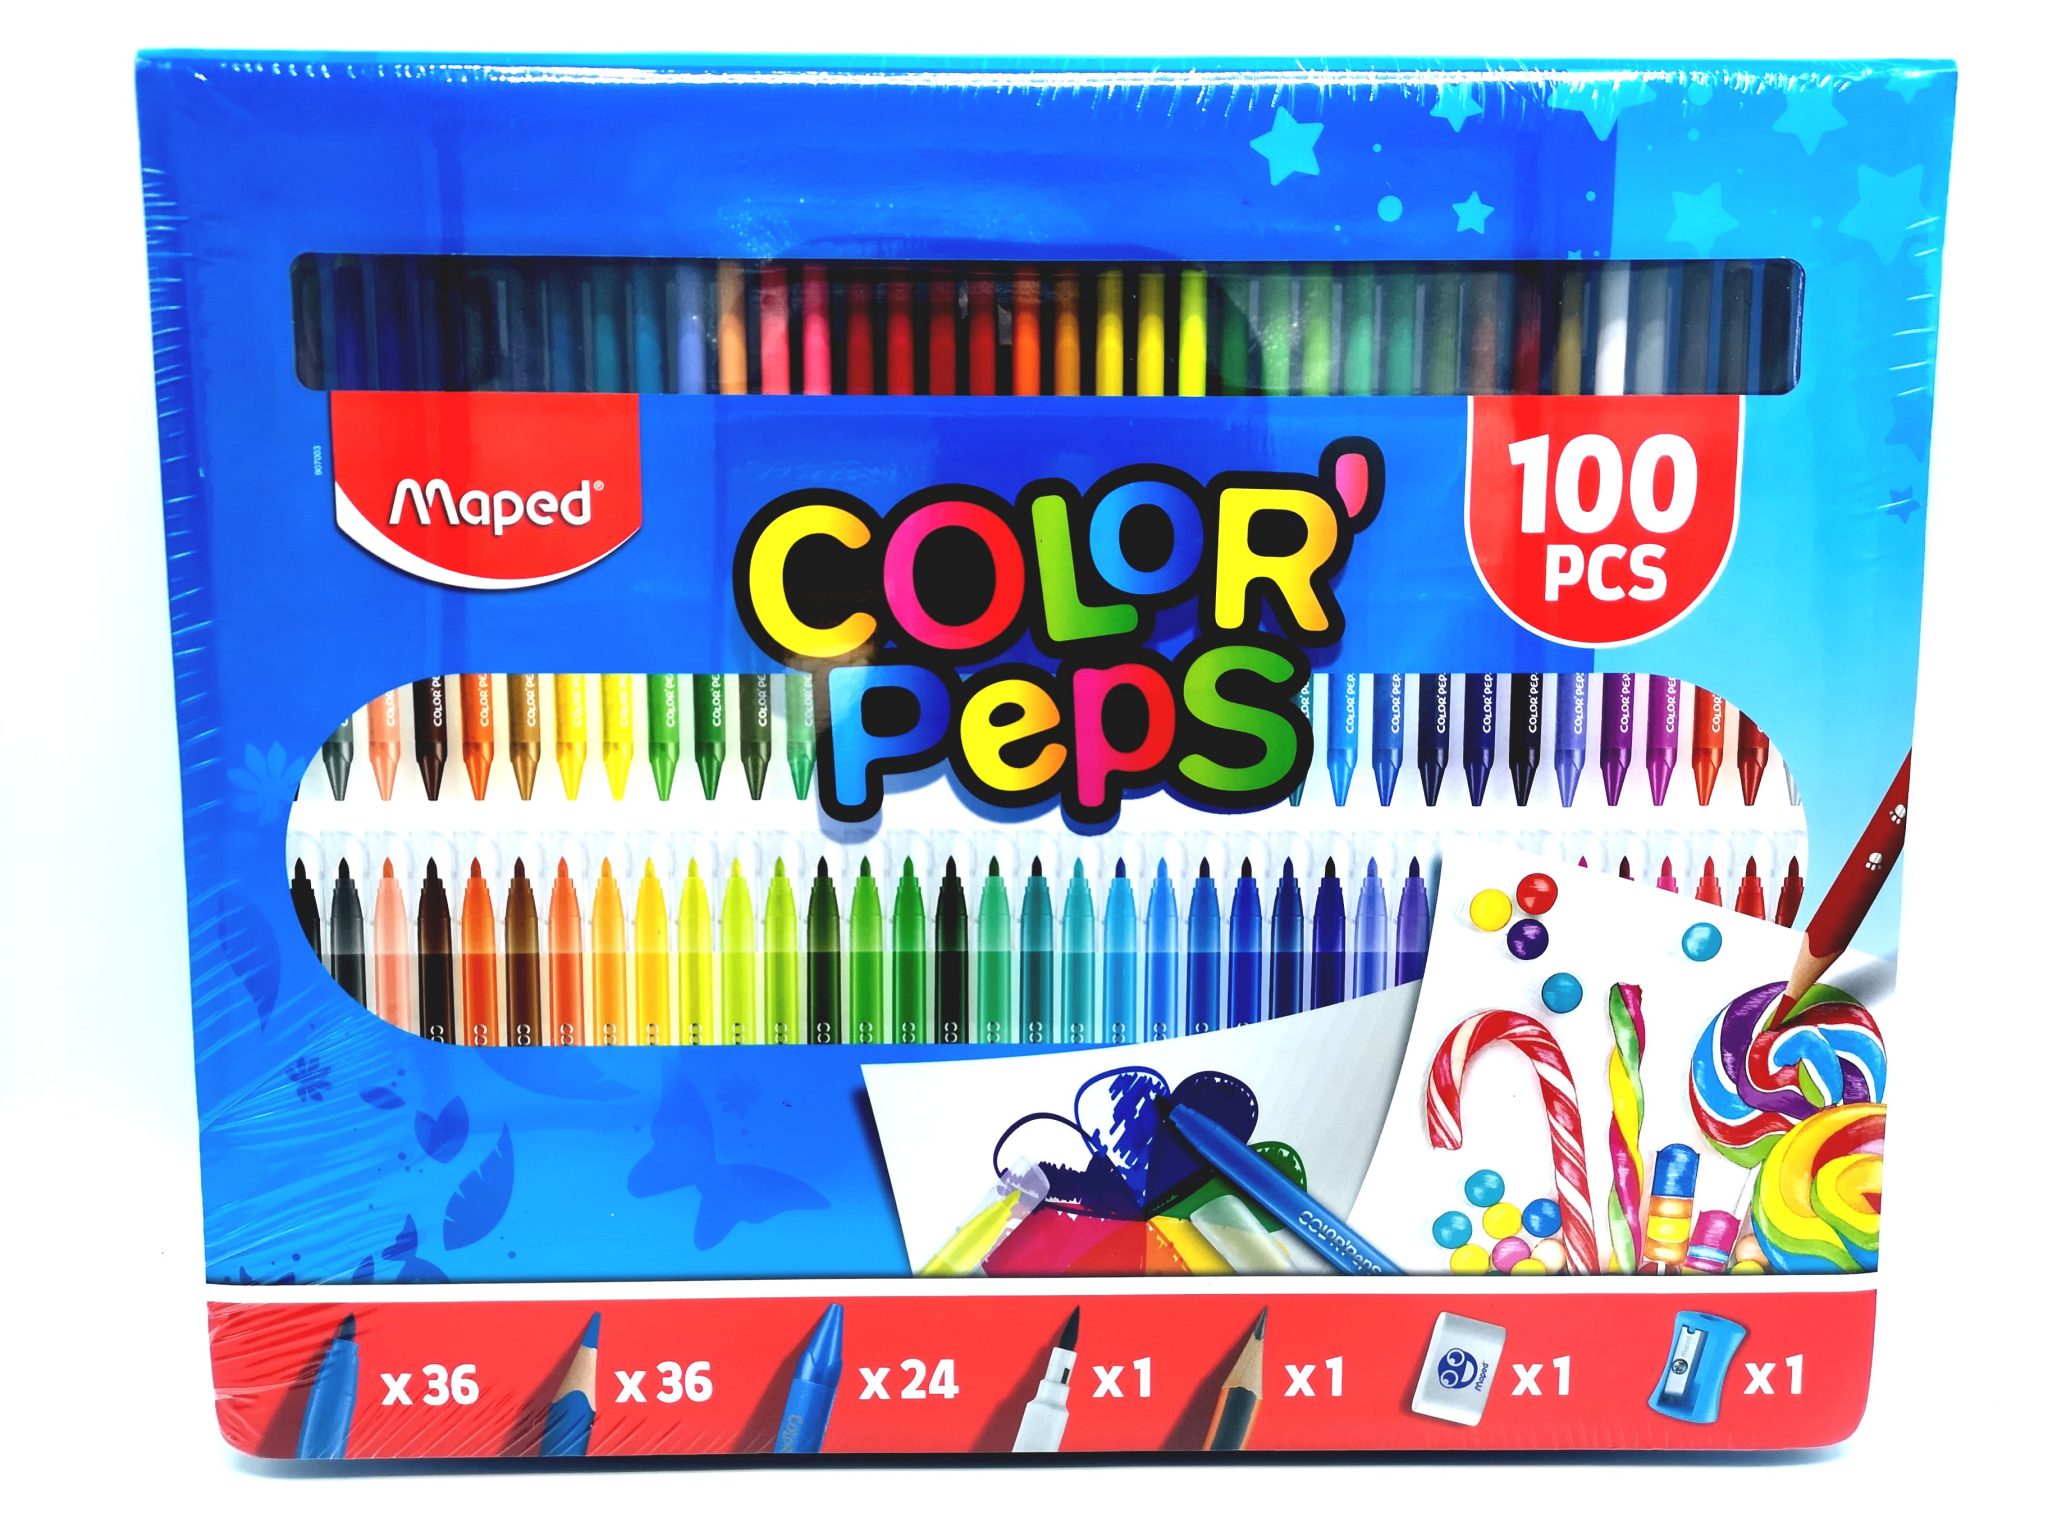 maped-color-peps-100-piece-set-king-s-paper-and-gift-shop